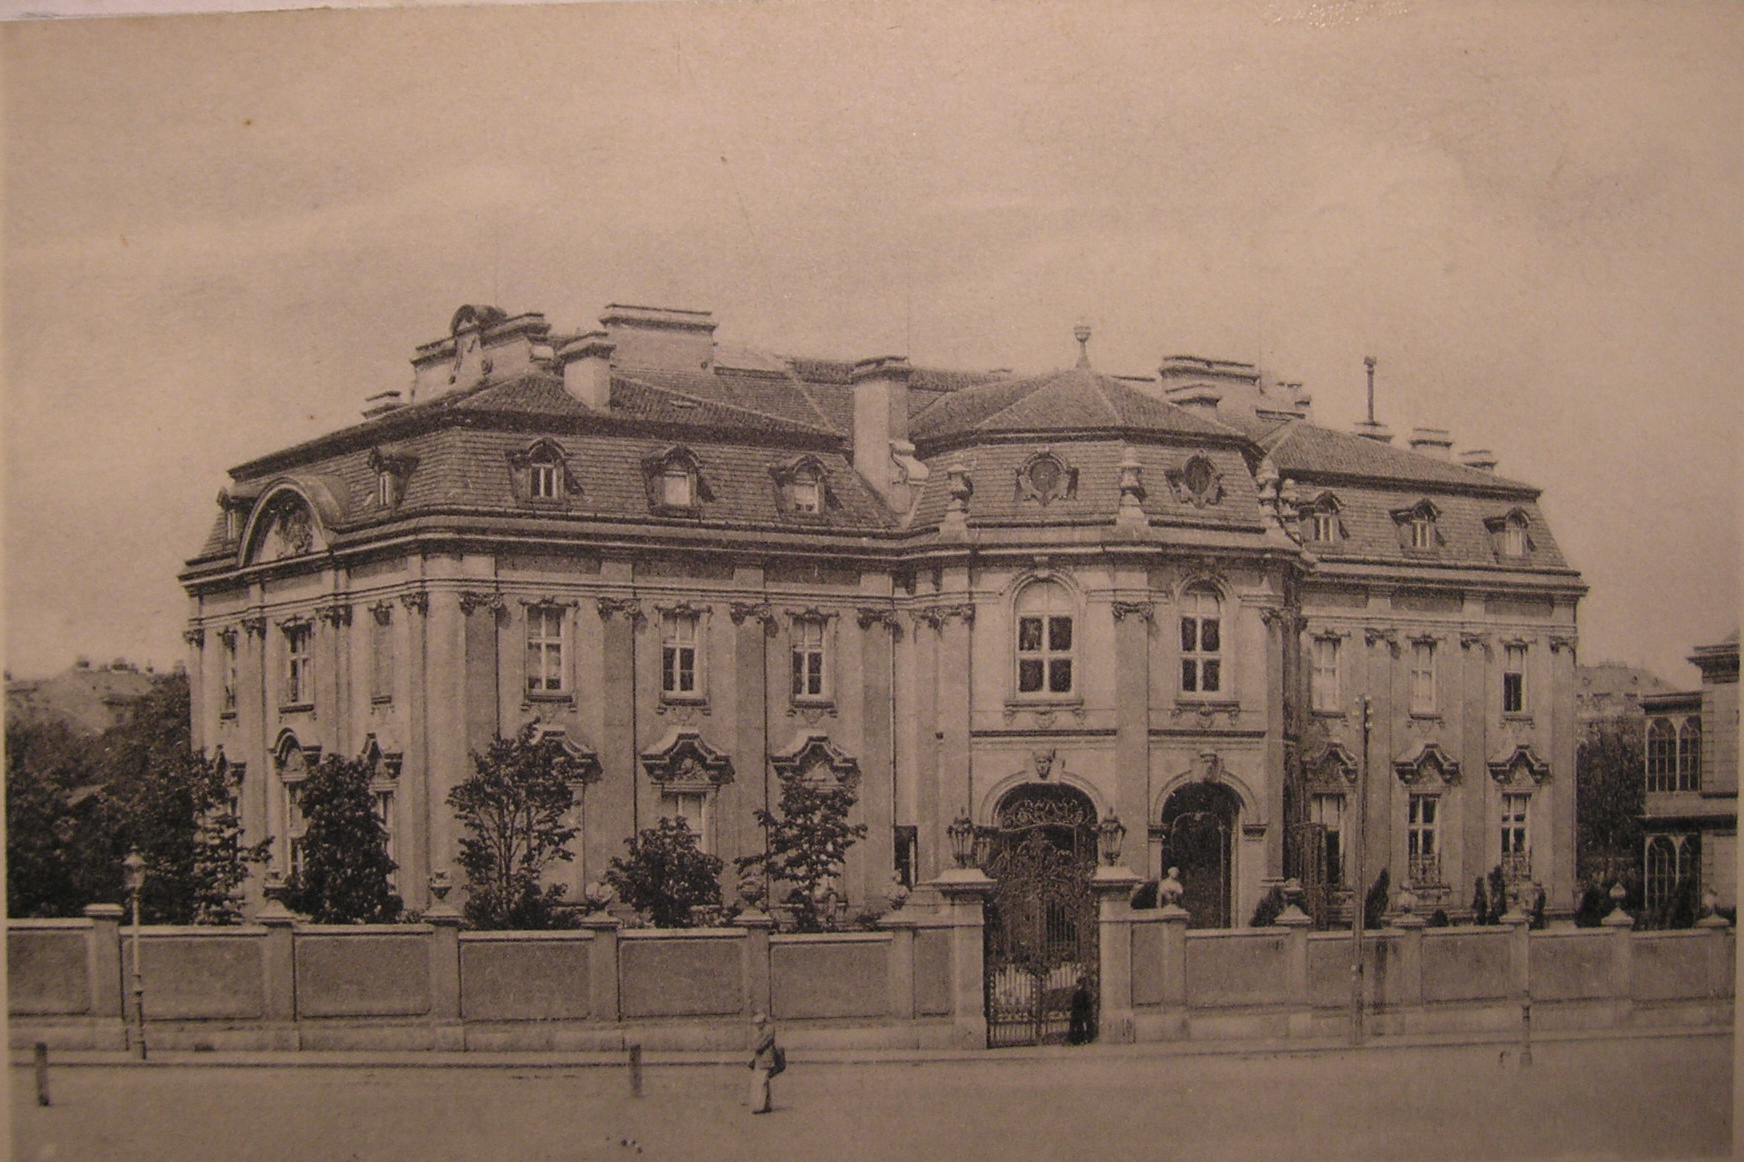 Palais Lanckoronski Vienna-2 - Image of the Palais Lanckoroński in Vienna, which was the private residence of Count Lanckoroński and his vast art collection, which was open to the public. The image is part of a post-card series that were made specifically for the building and its collection.